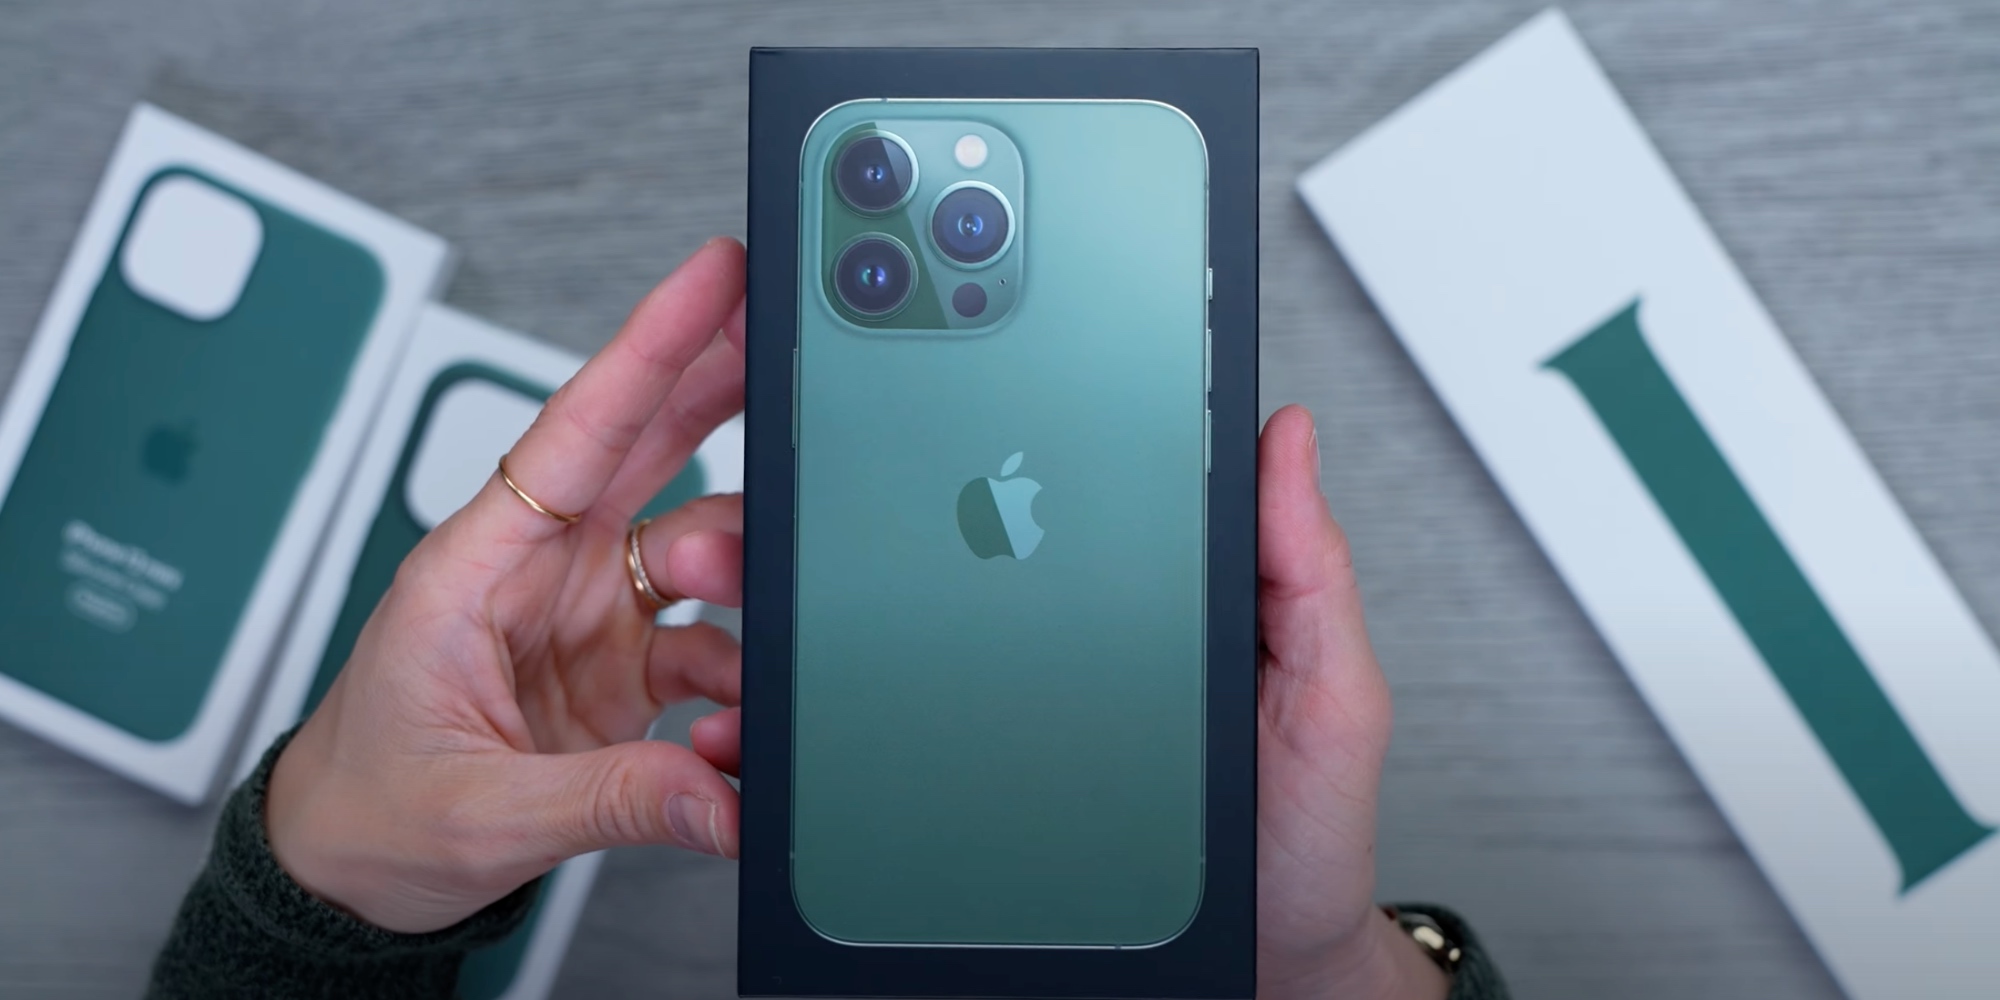 Roundup Here S A Closer Look At The New Green Iphone 13 And Iphone 13 Pro Designs 9to5mac